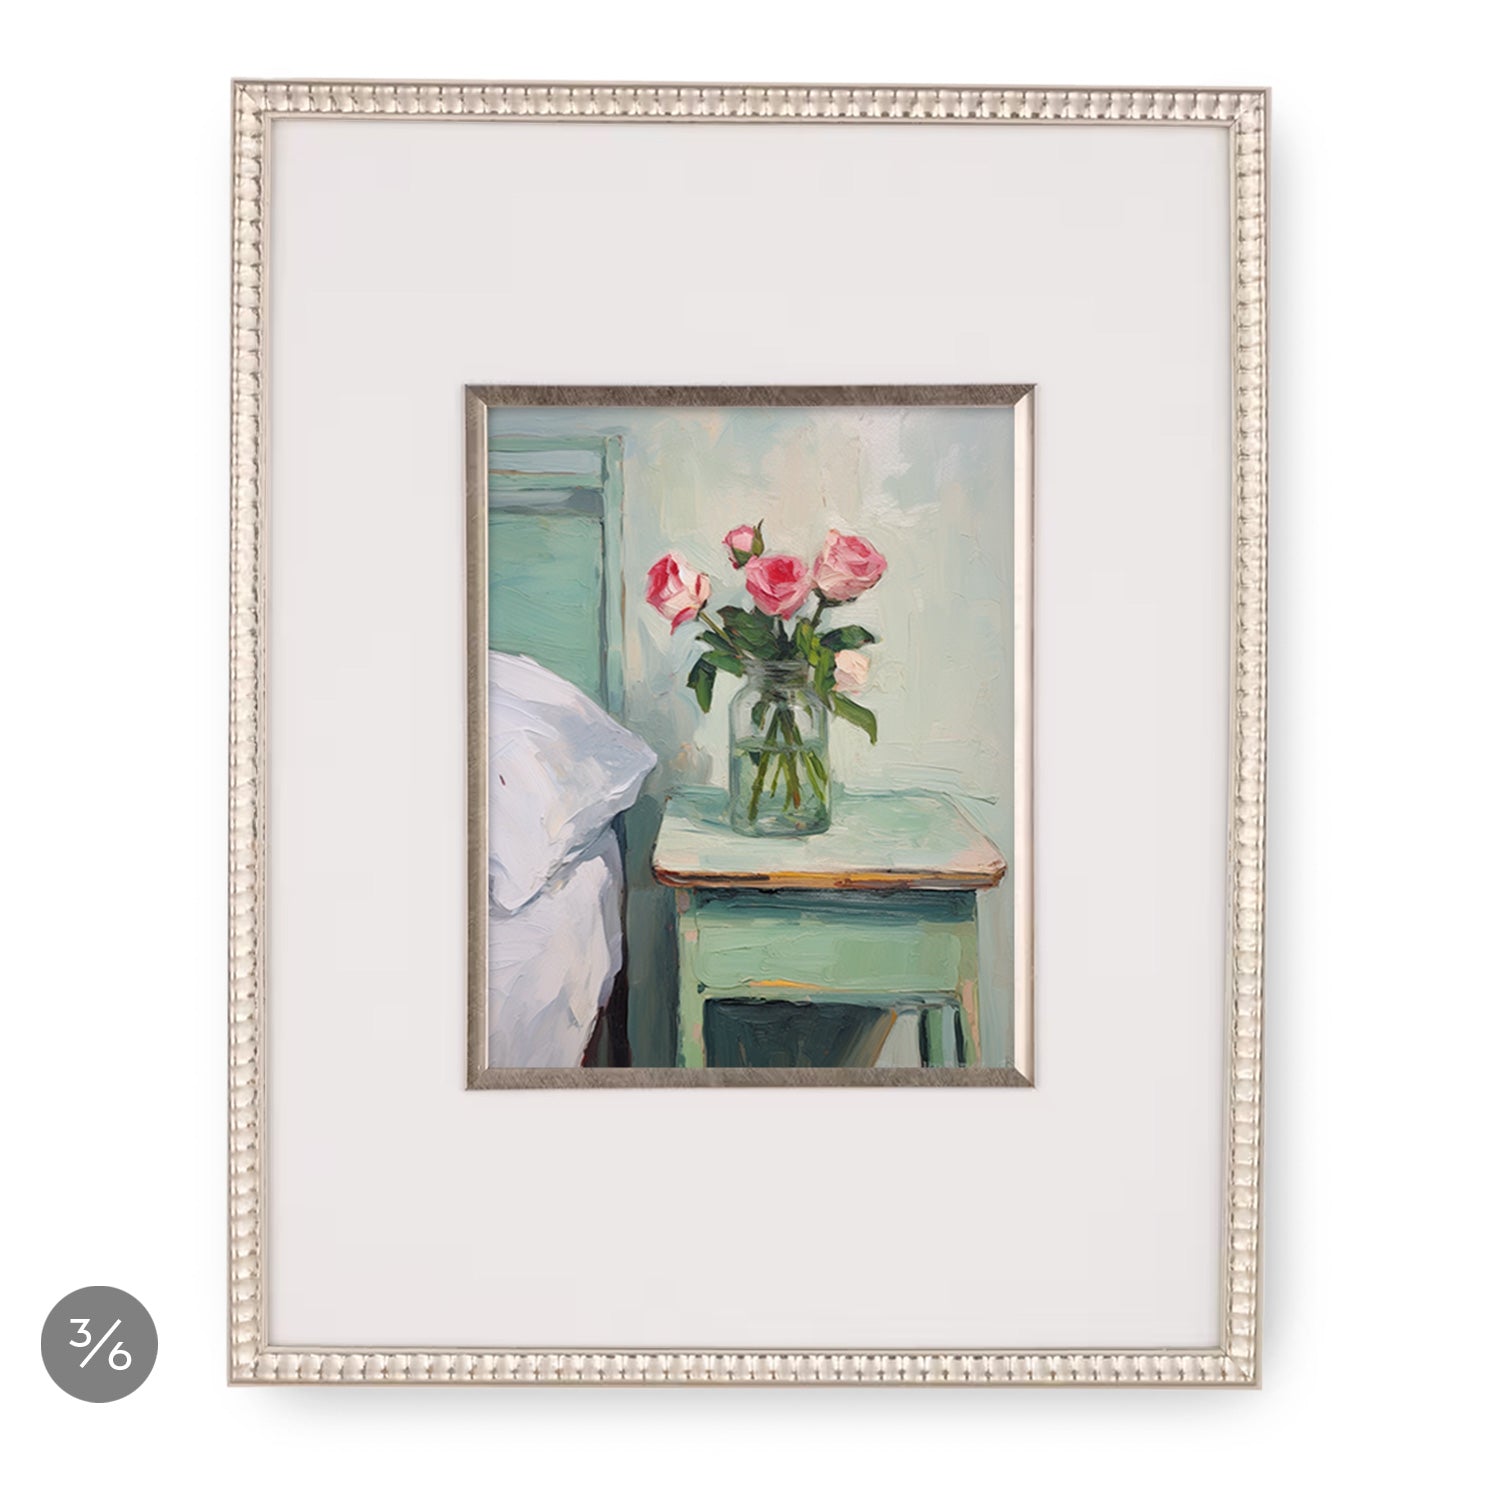 A stunning art piece showcasing vibrant roses in a vase on a green table, perfect for adding a touch of elegance to any Stannie & Lloyd Gallery Wall | Sweet Tart | 6 Piece Set.